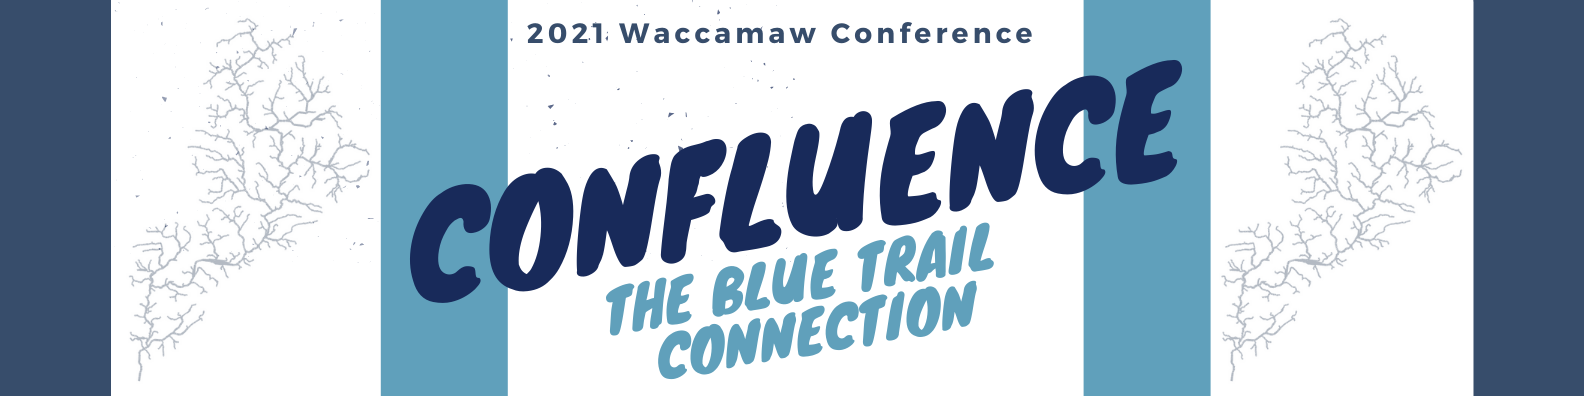 A River Journey: the 2021 Waccamaw Conference